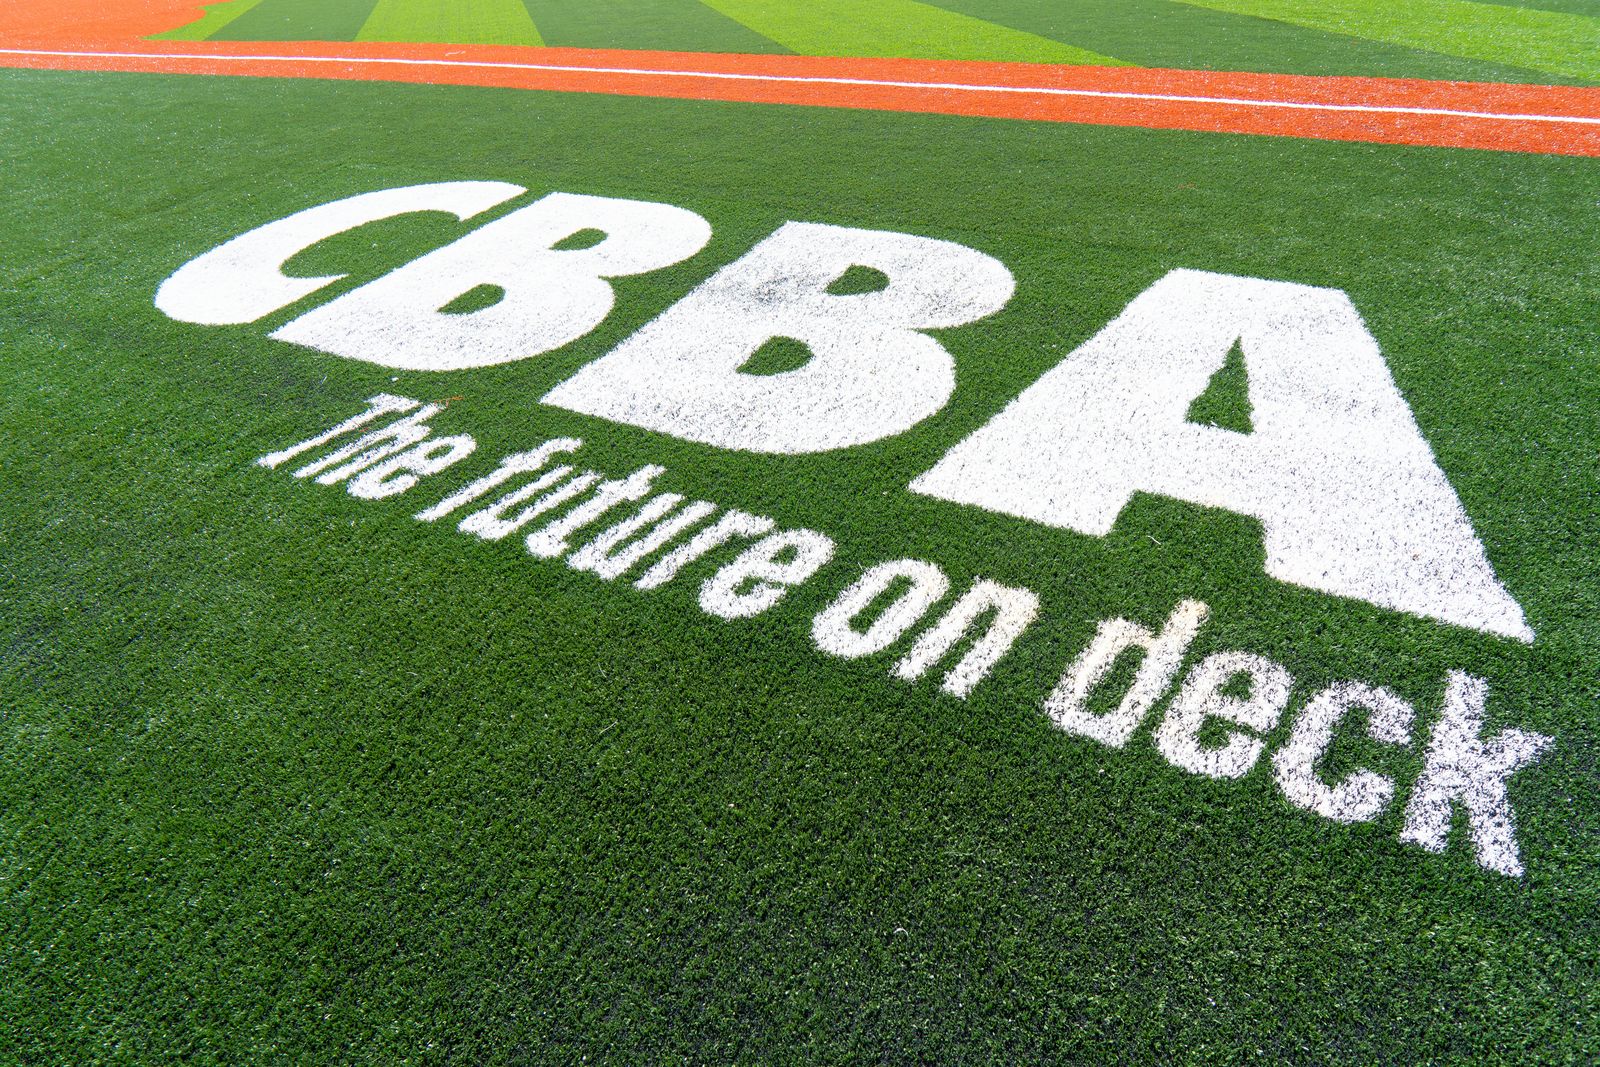 Read more about the article Carlos Beltrán Baseball Academy (CBBA) Partners with Global Naming Agency Brand Institute